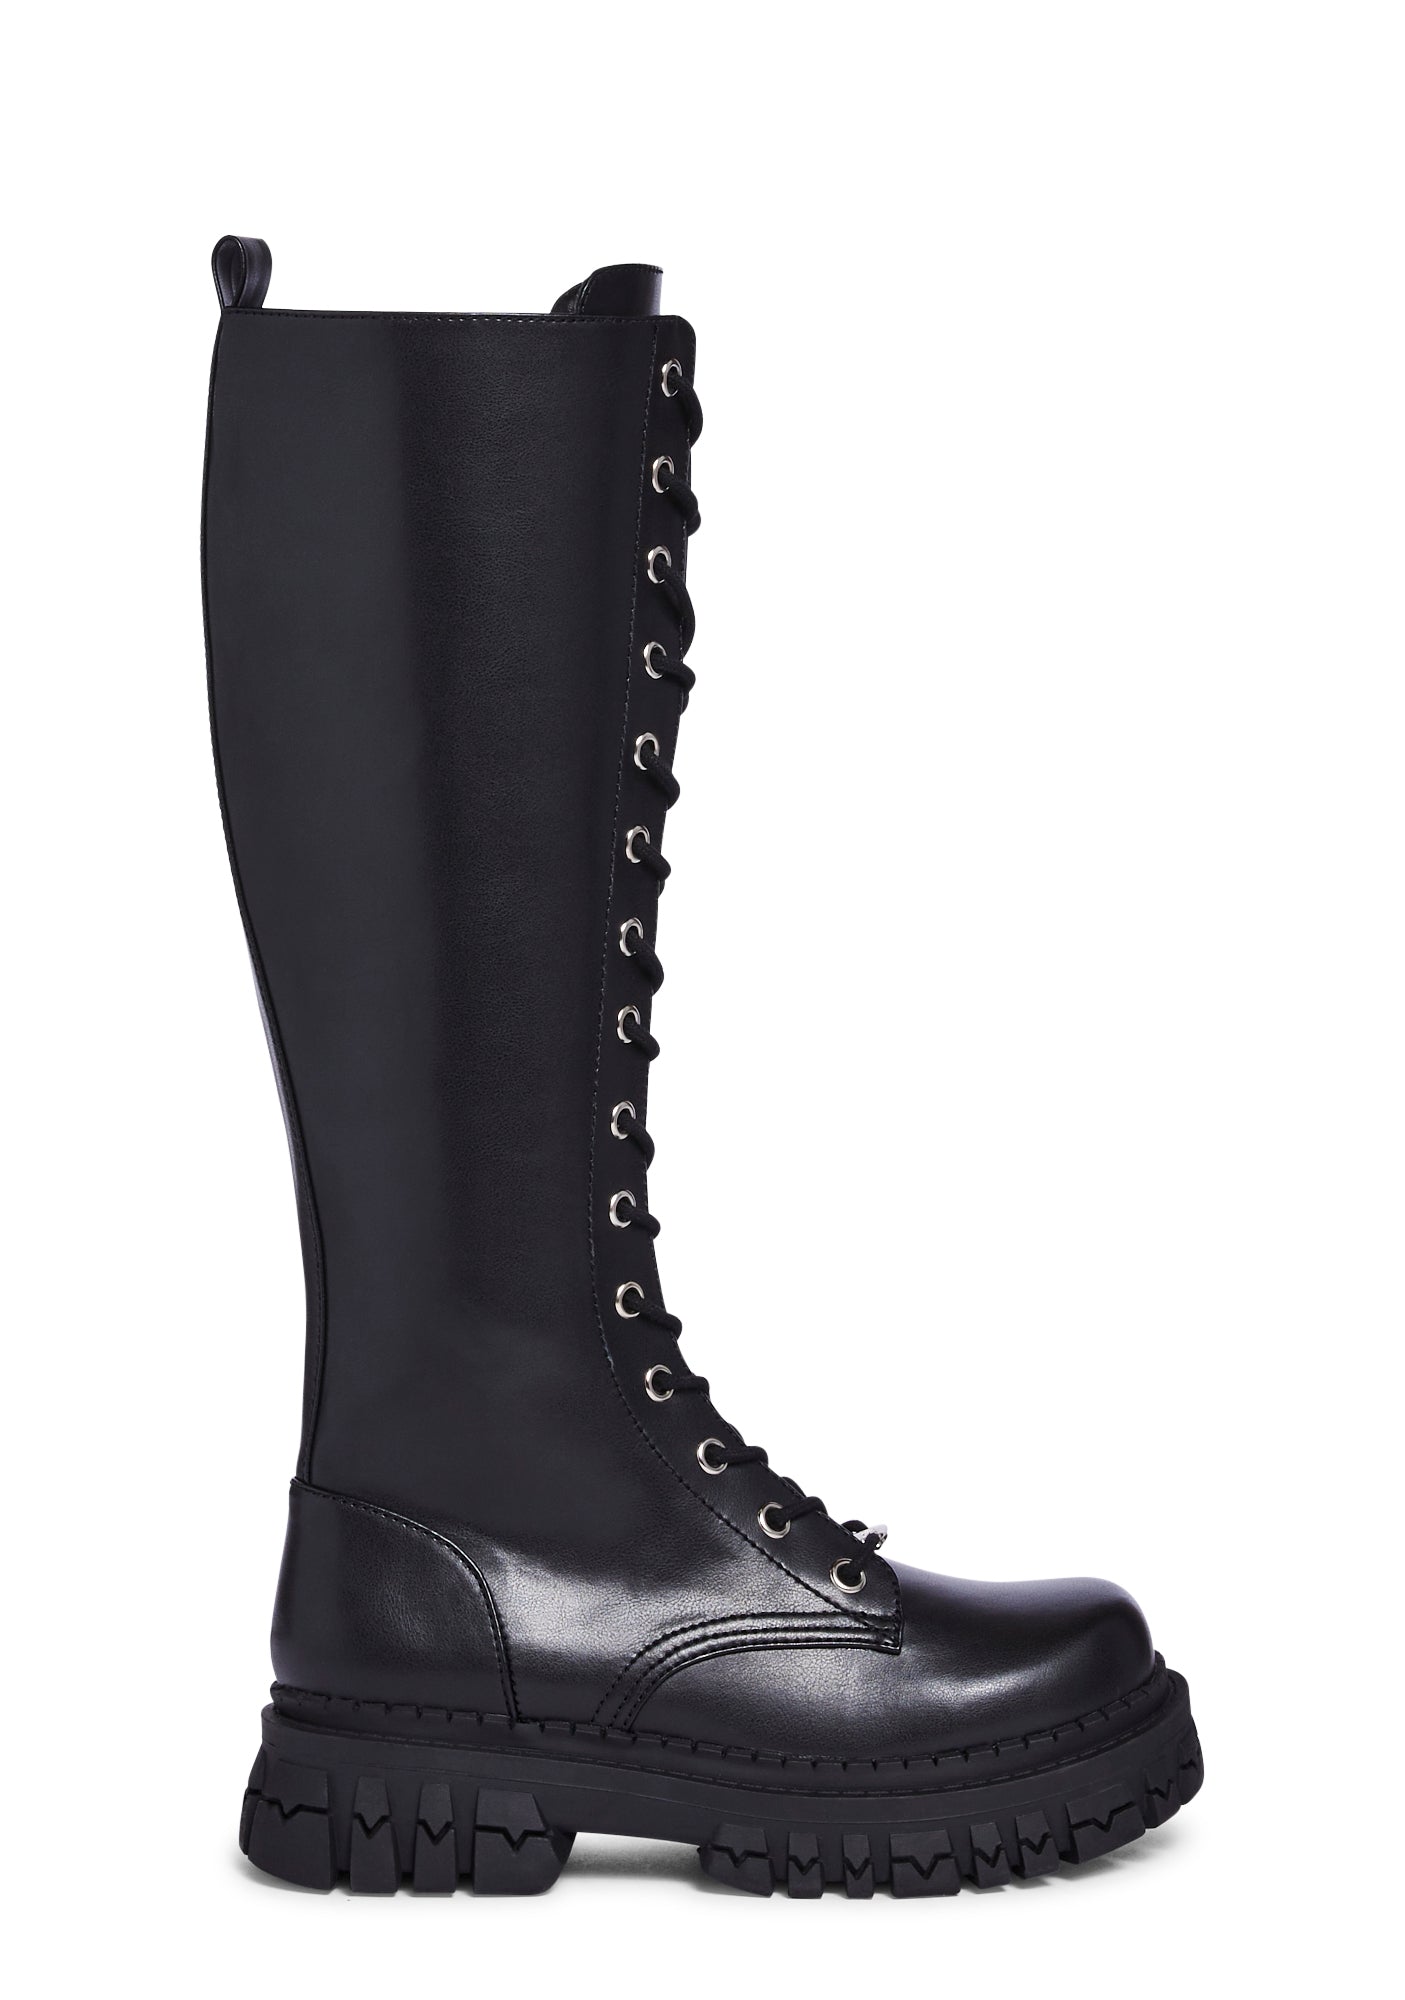 Delia's Lace Up Side Zip Knee High Boots - Black